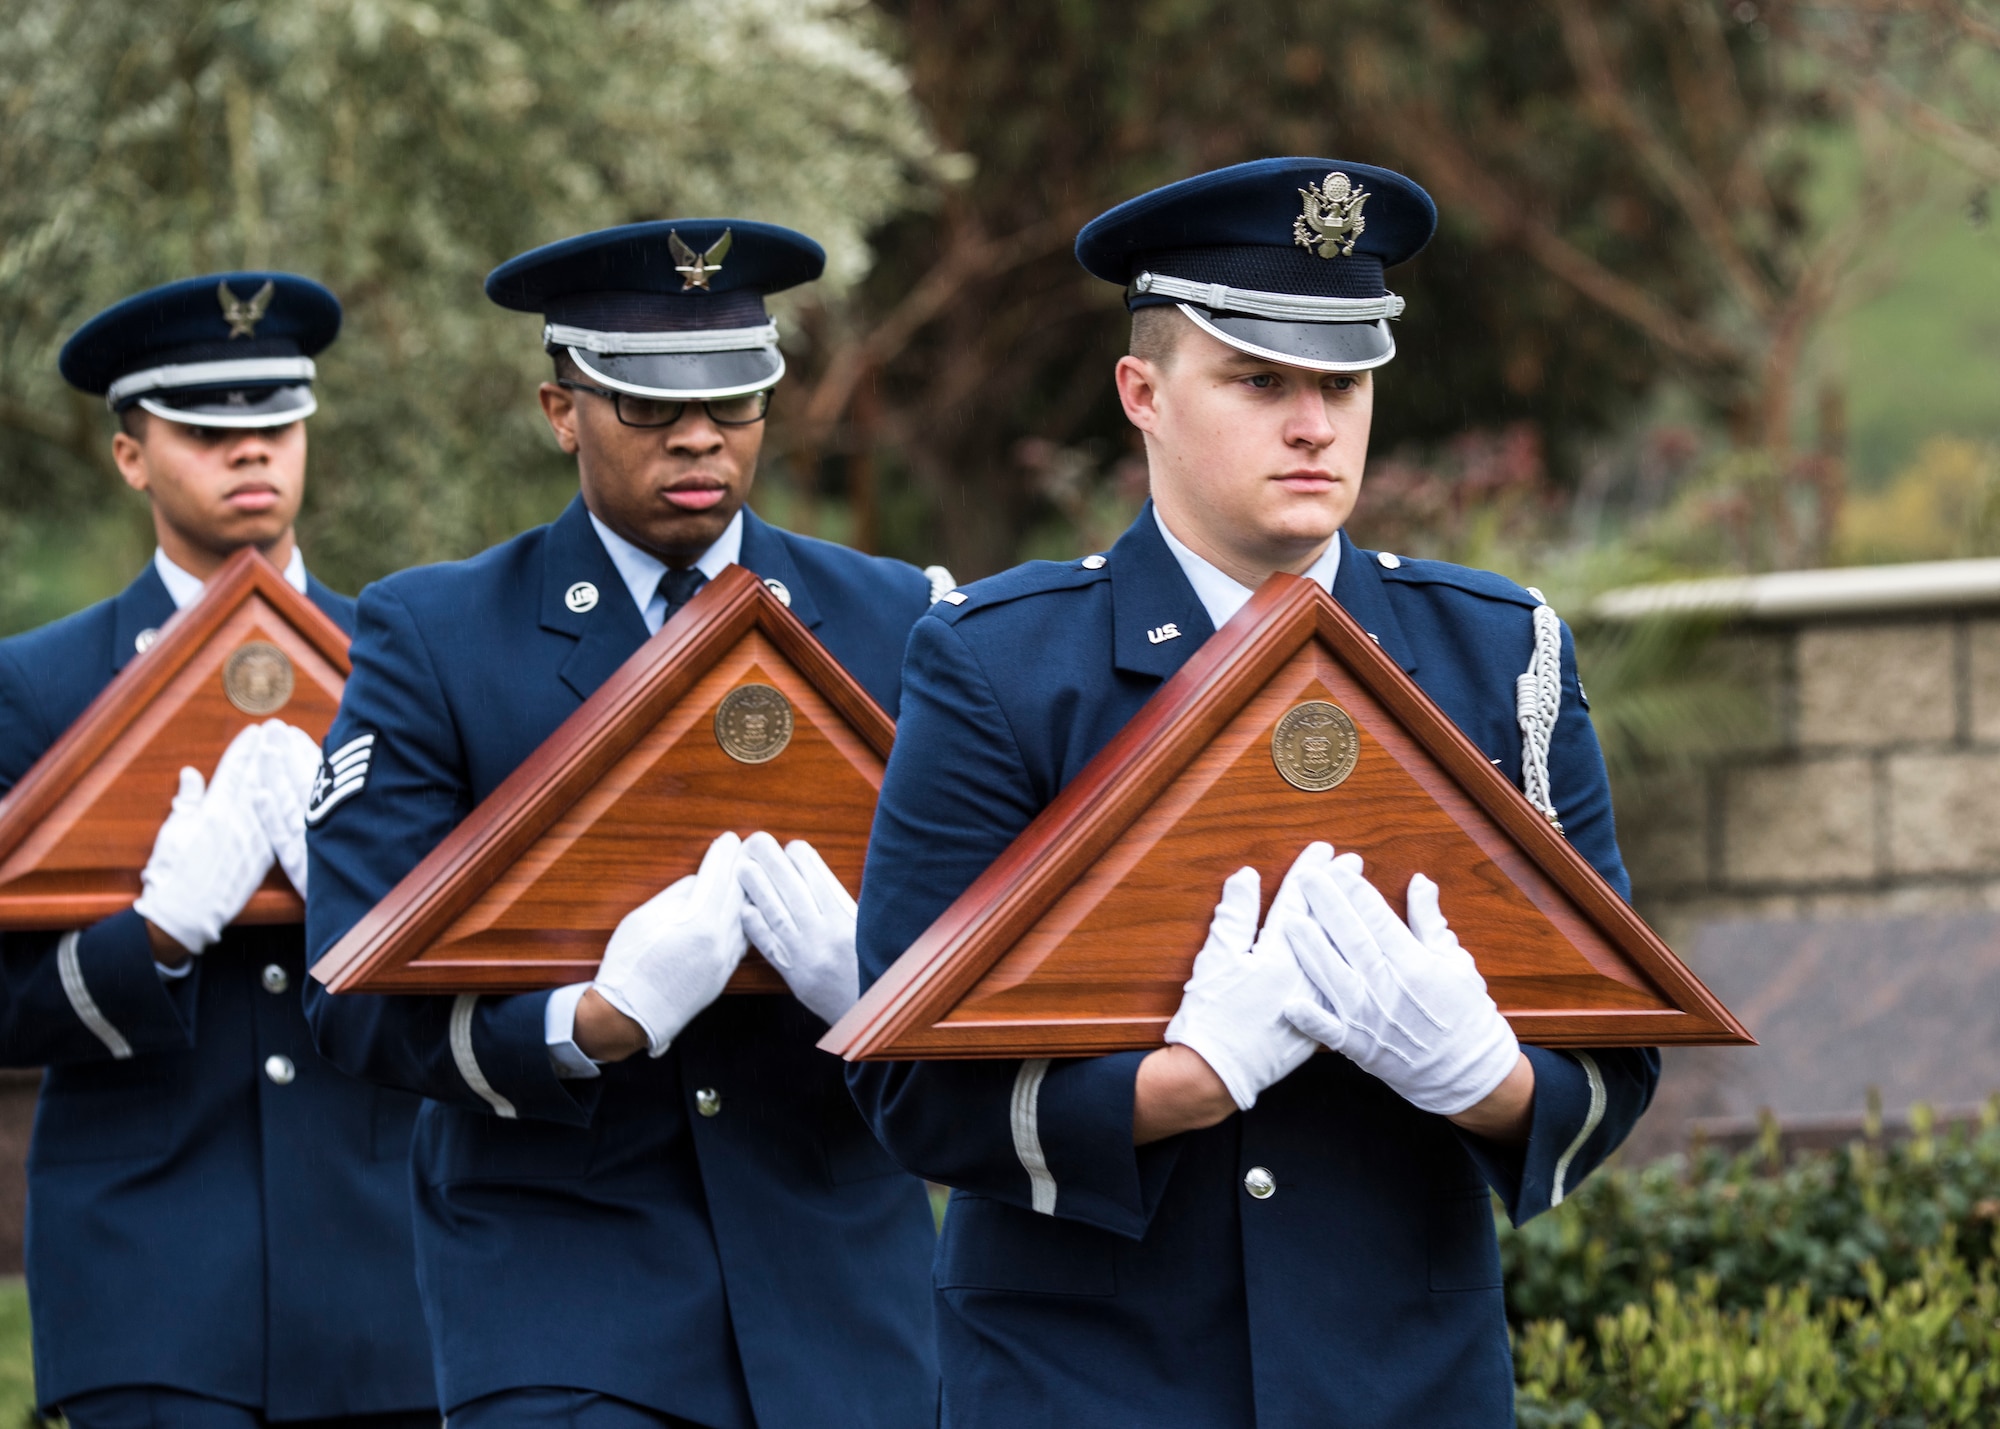 Vandenberg Honor Guard ceremonial guardsmen present flags to family members during a U.S. Air Force active duty funeral March 2, 2019 in Camarillo, Calif. Honor Guardsmen have many duties throughout a ceremony, one of which is to present the first-of-kin with a flag to honor their fallen loved one. (U.S. Air Force photo by Airman 1st Class Aubree Milks)